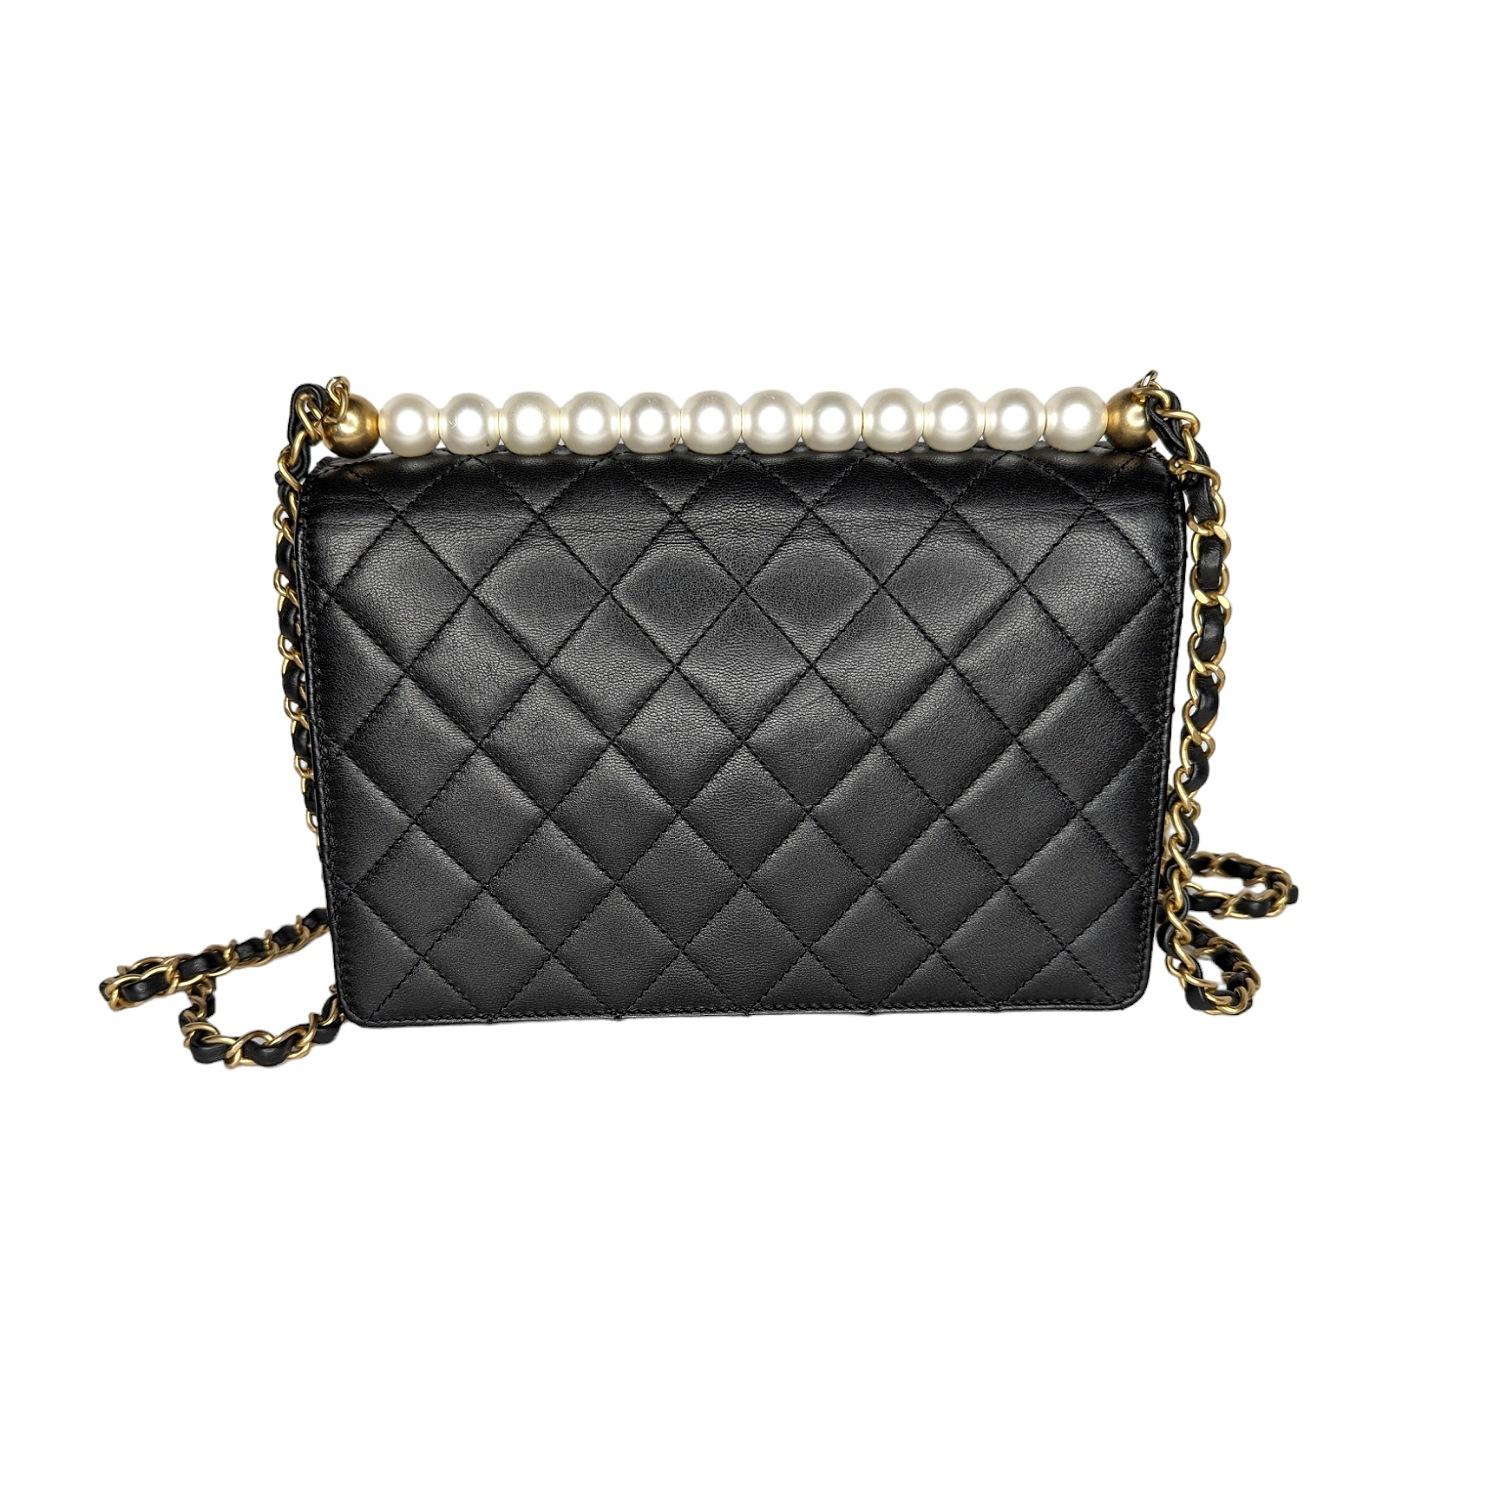 This stylish shoulder bag is crafted of diamond-quilted textured lambskin leather in black. The bag features a leather threaded matte gold chain strap, resin pearls lining the top, and a flap with a matte gold classic CC turn lock. This opens to a